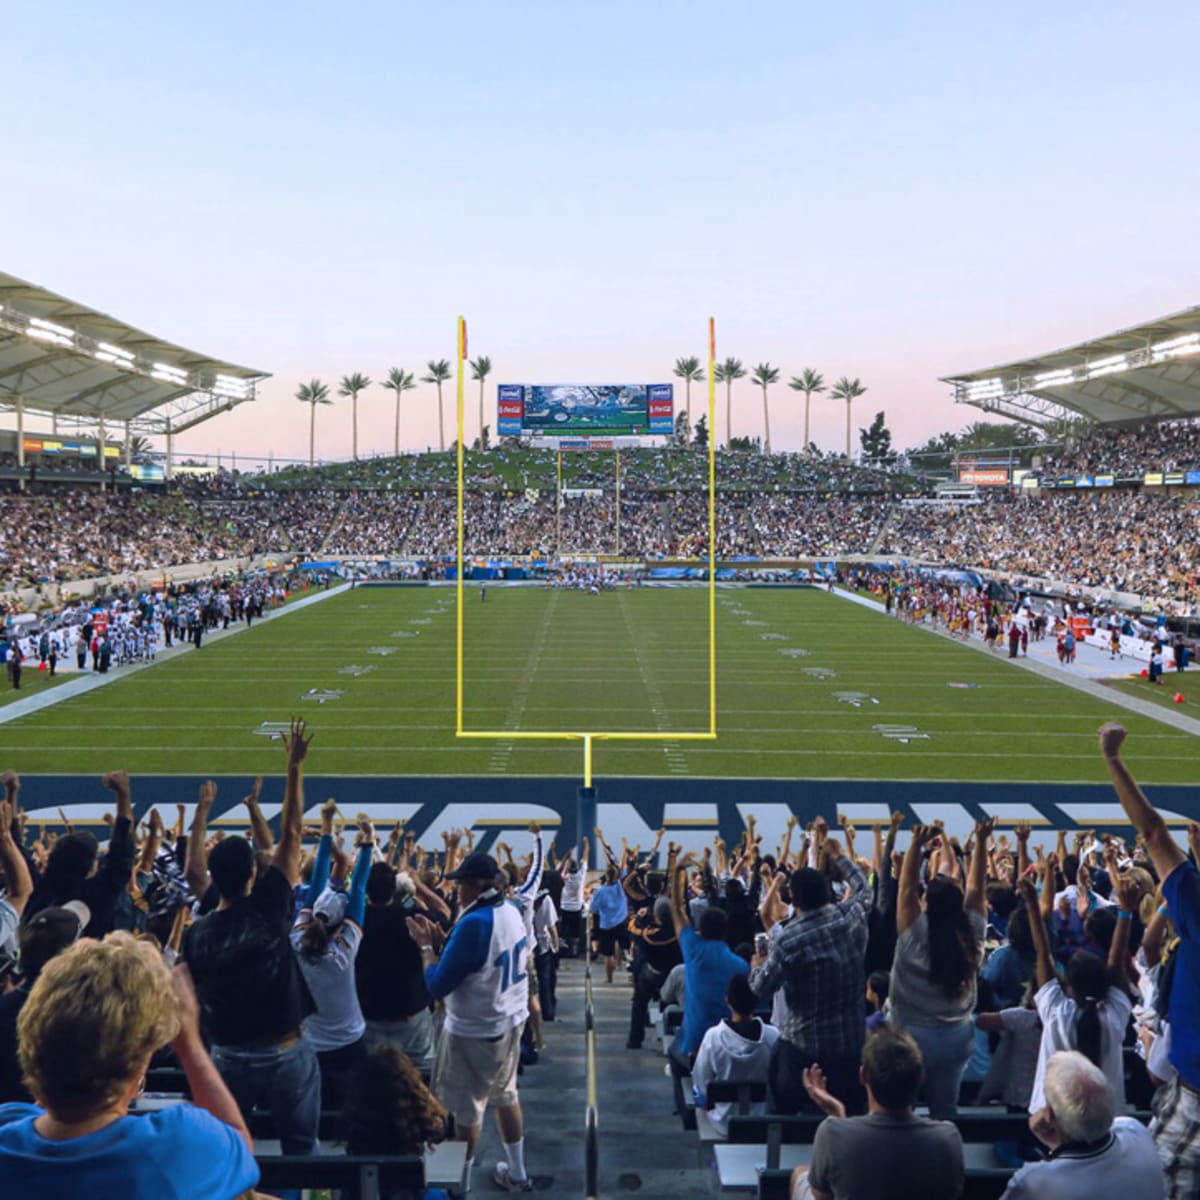 Chargers Will Play in Intimate 30,000-Seat LA Galaxy Soccer Stadium